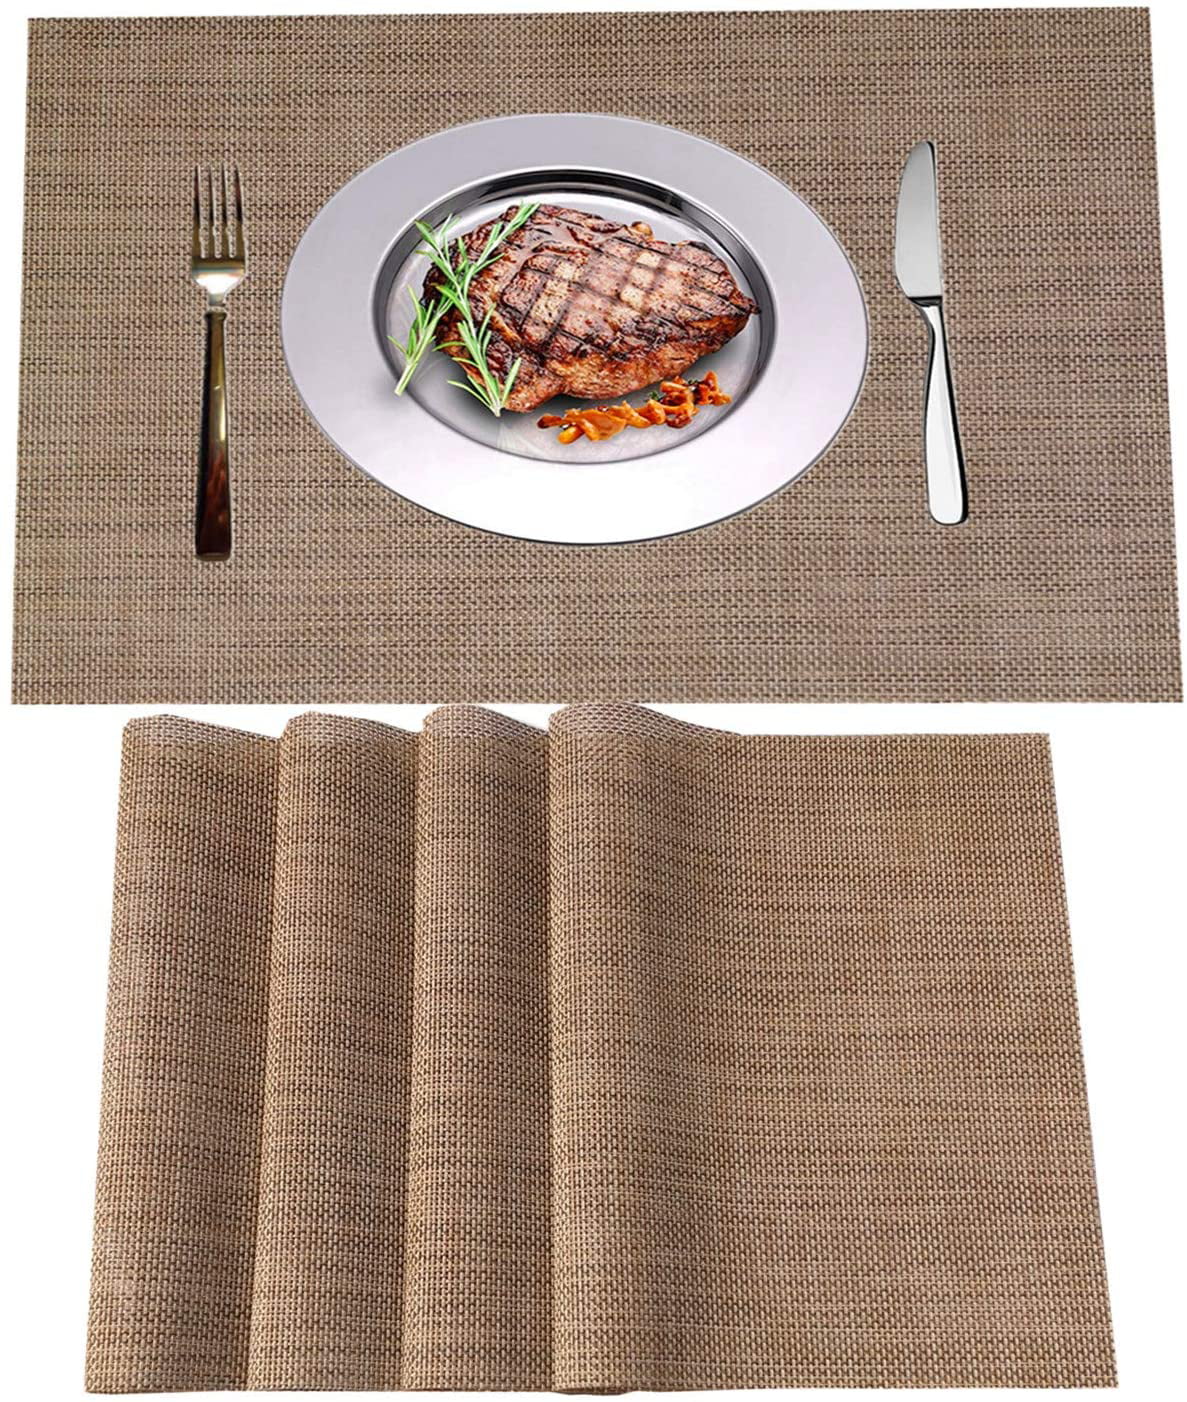 New Home Dining Room Table Placemats PVC Heat Insulation Stain-resistant Mat B